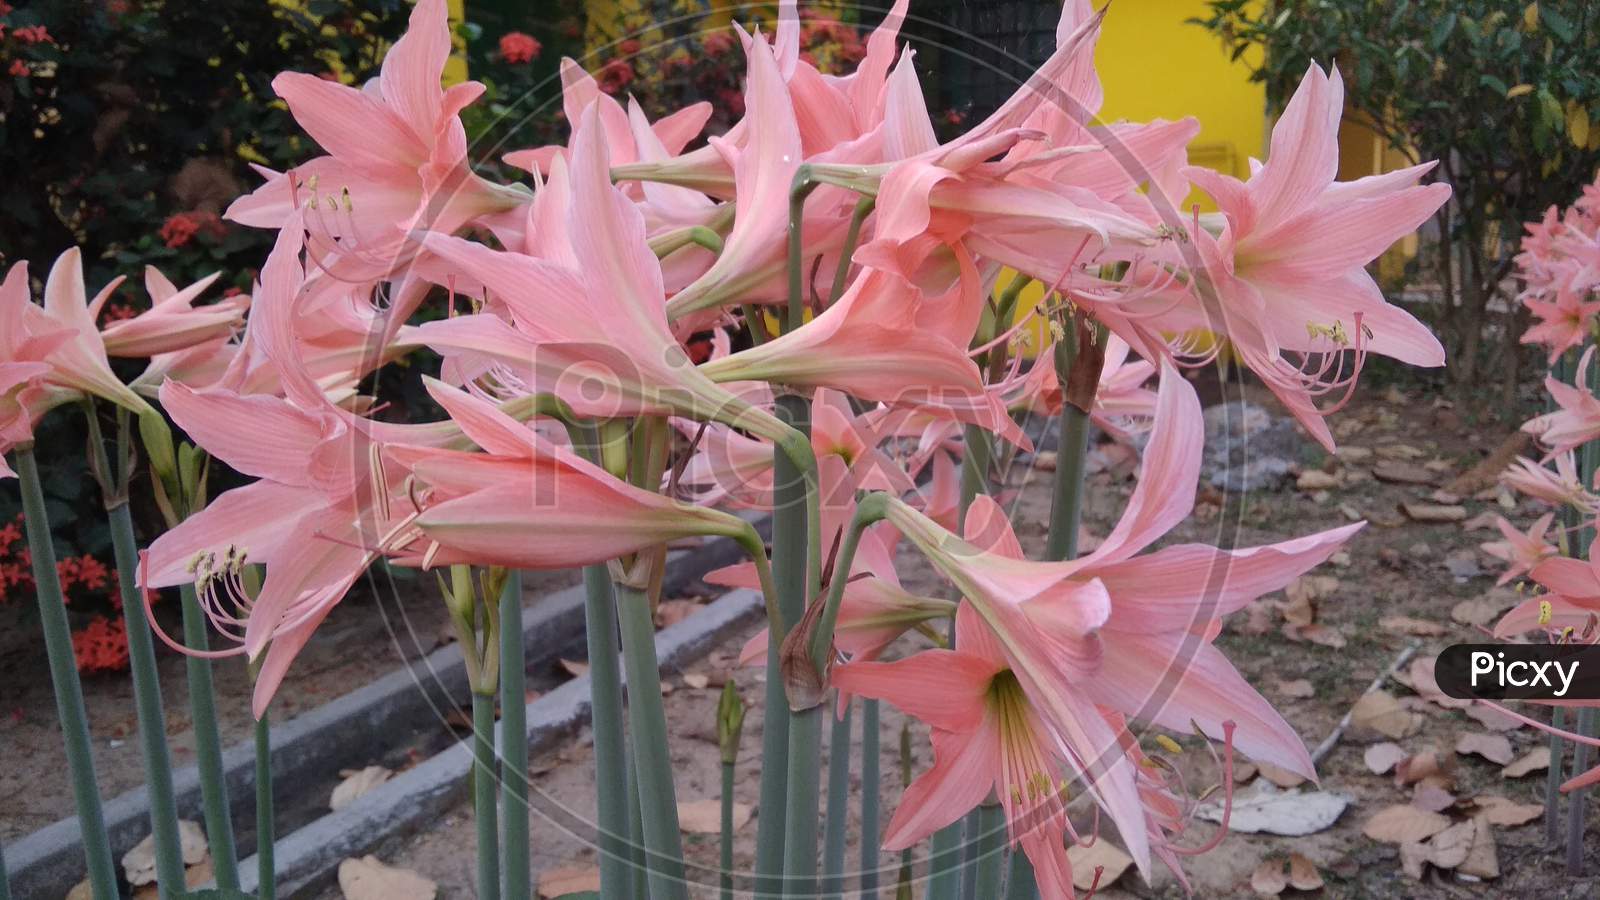 Hippeastrum pink fade lily flowering plant. Blur background